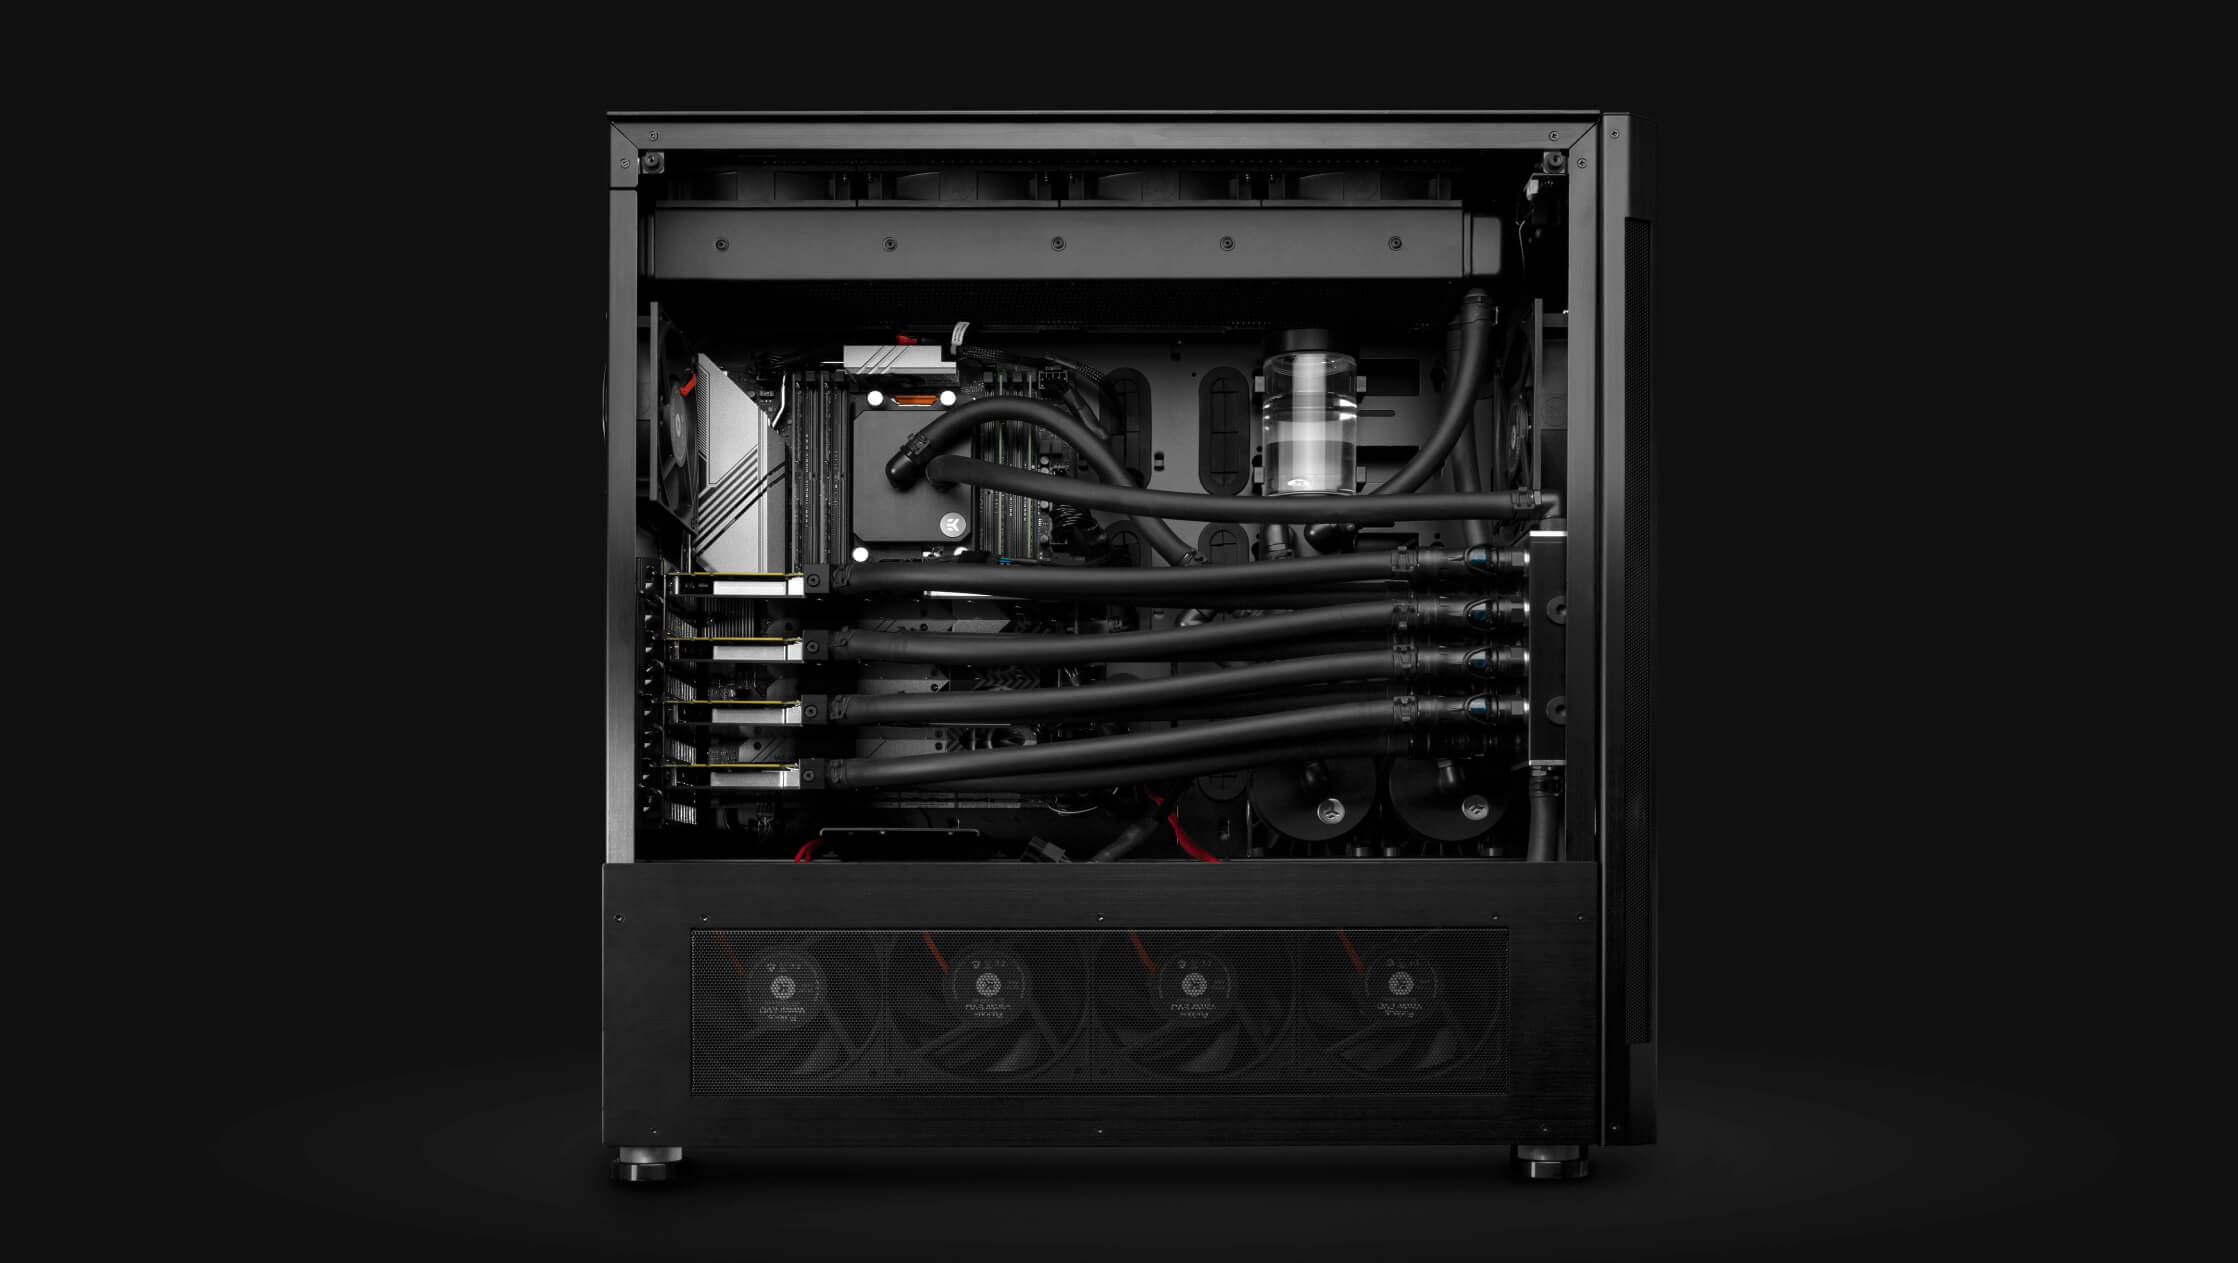 EK-Fluid Works Studio Series S5000 workstation with 4 GPUs and high-performance CPU – well beyond SolidWorks hardware requirements